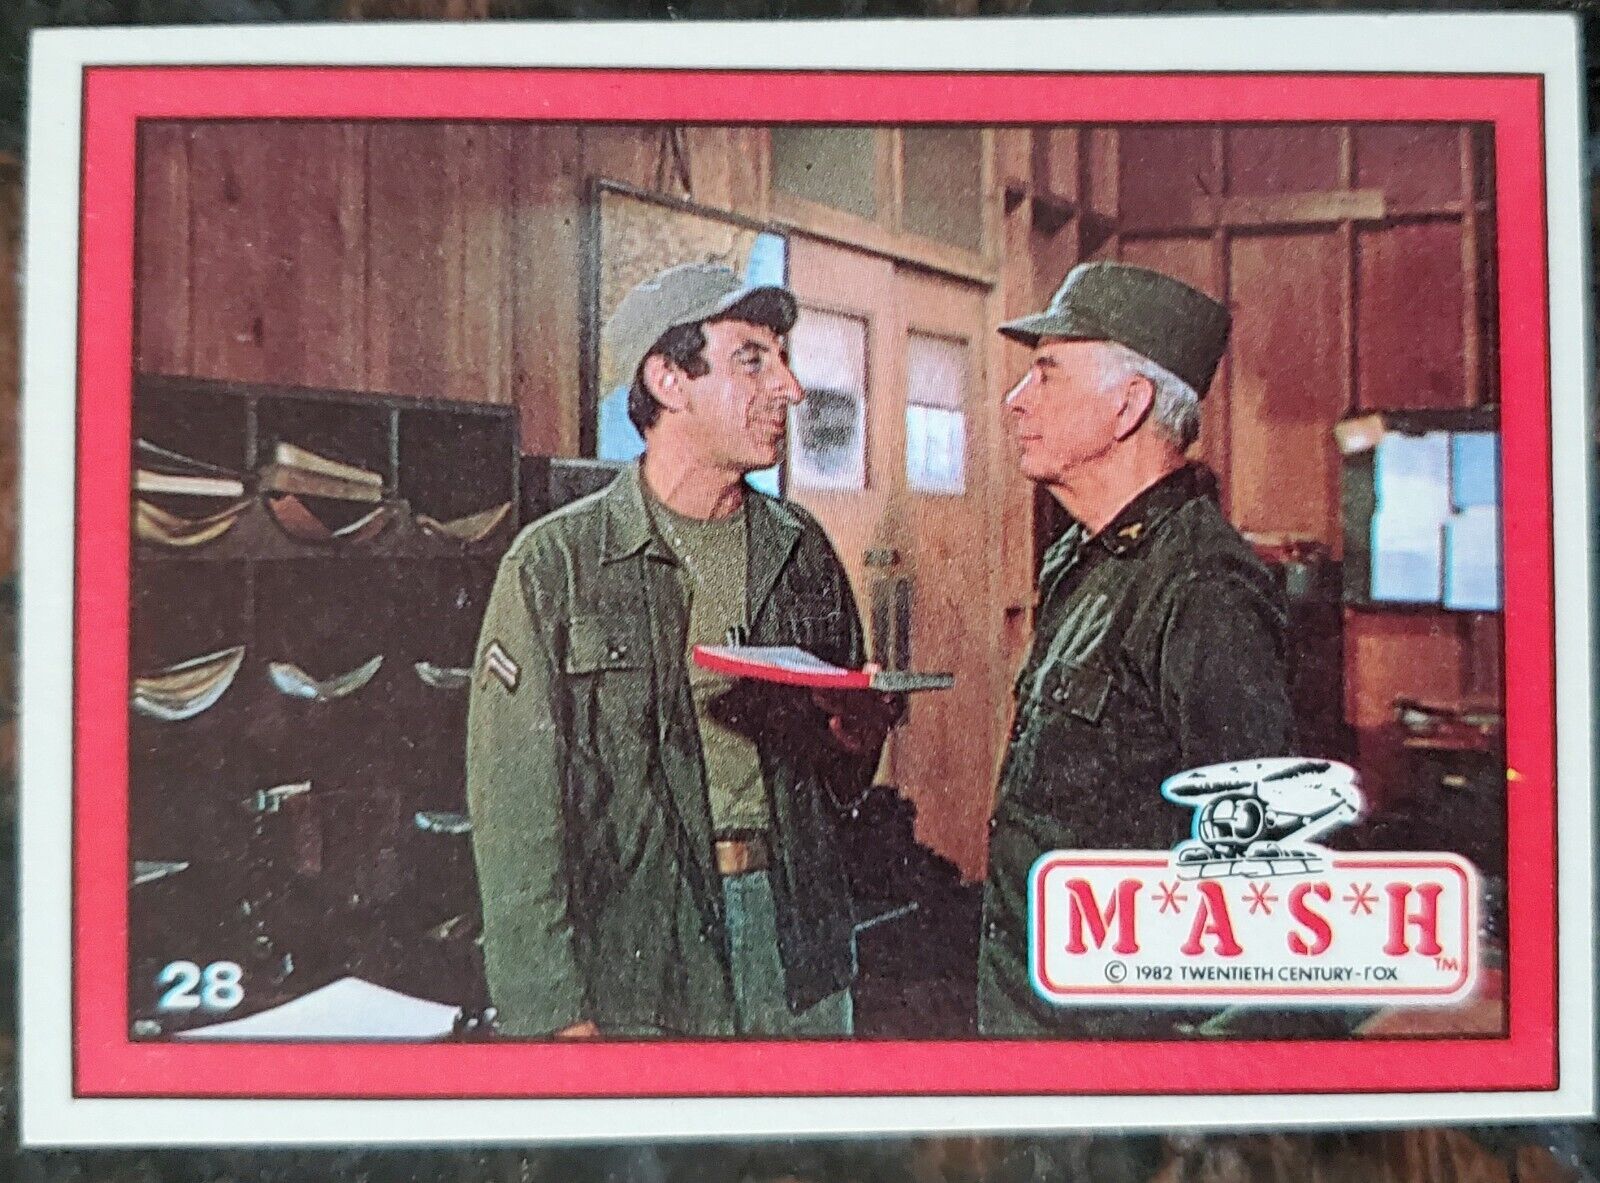 1982 M*A*S*H TV Show Topps Card Colonel Potter Corporal Klinger 20th Century Fox